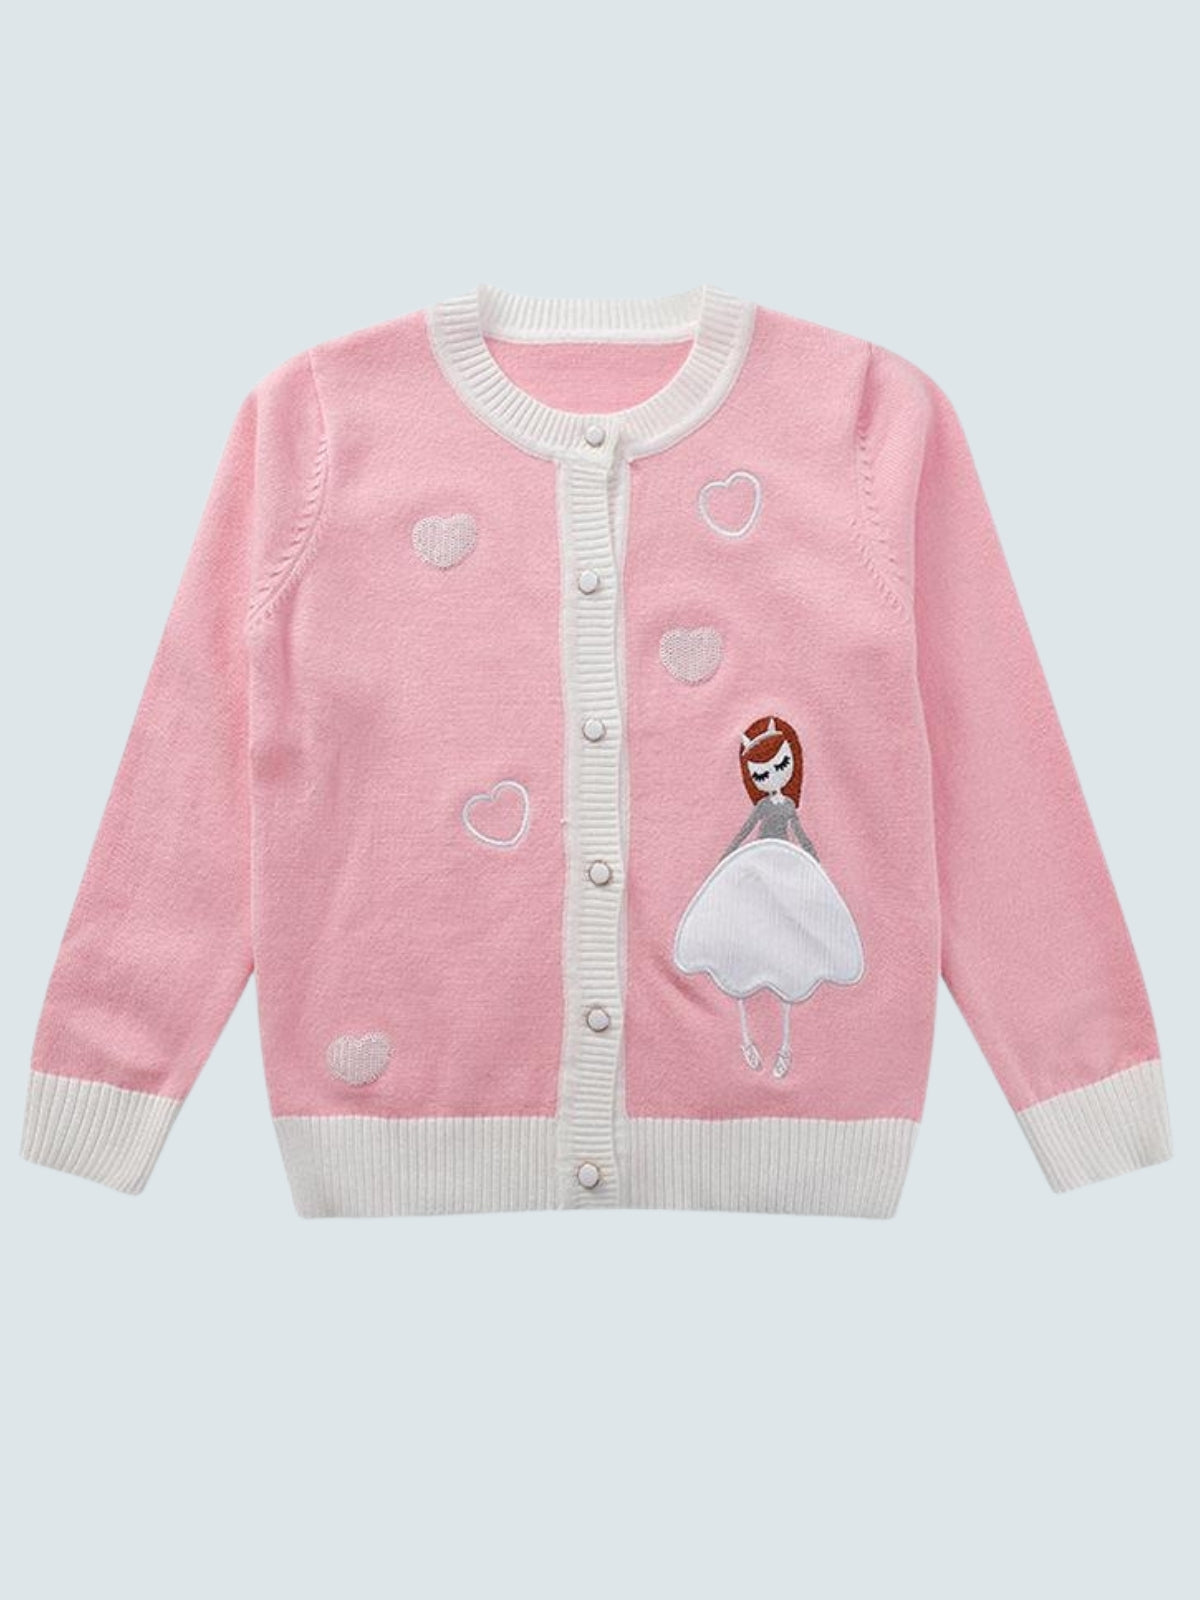 Girls knit sweater with heart and ballerina details